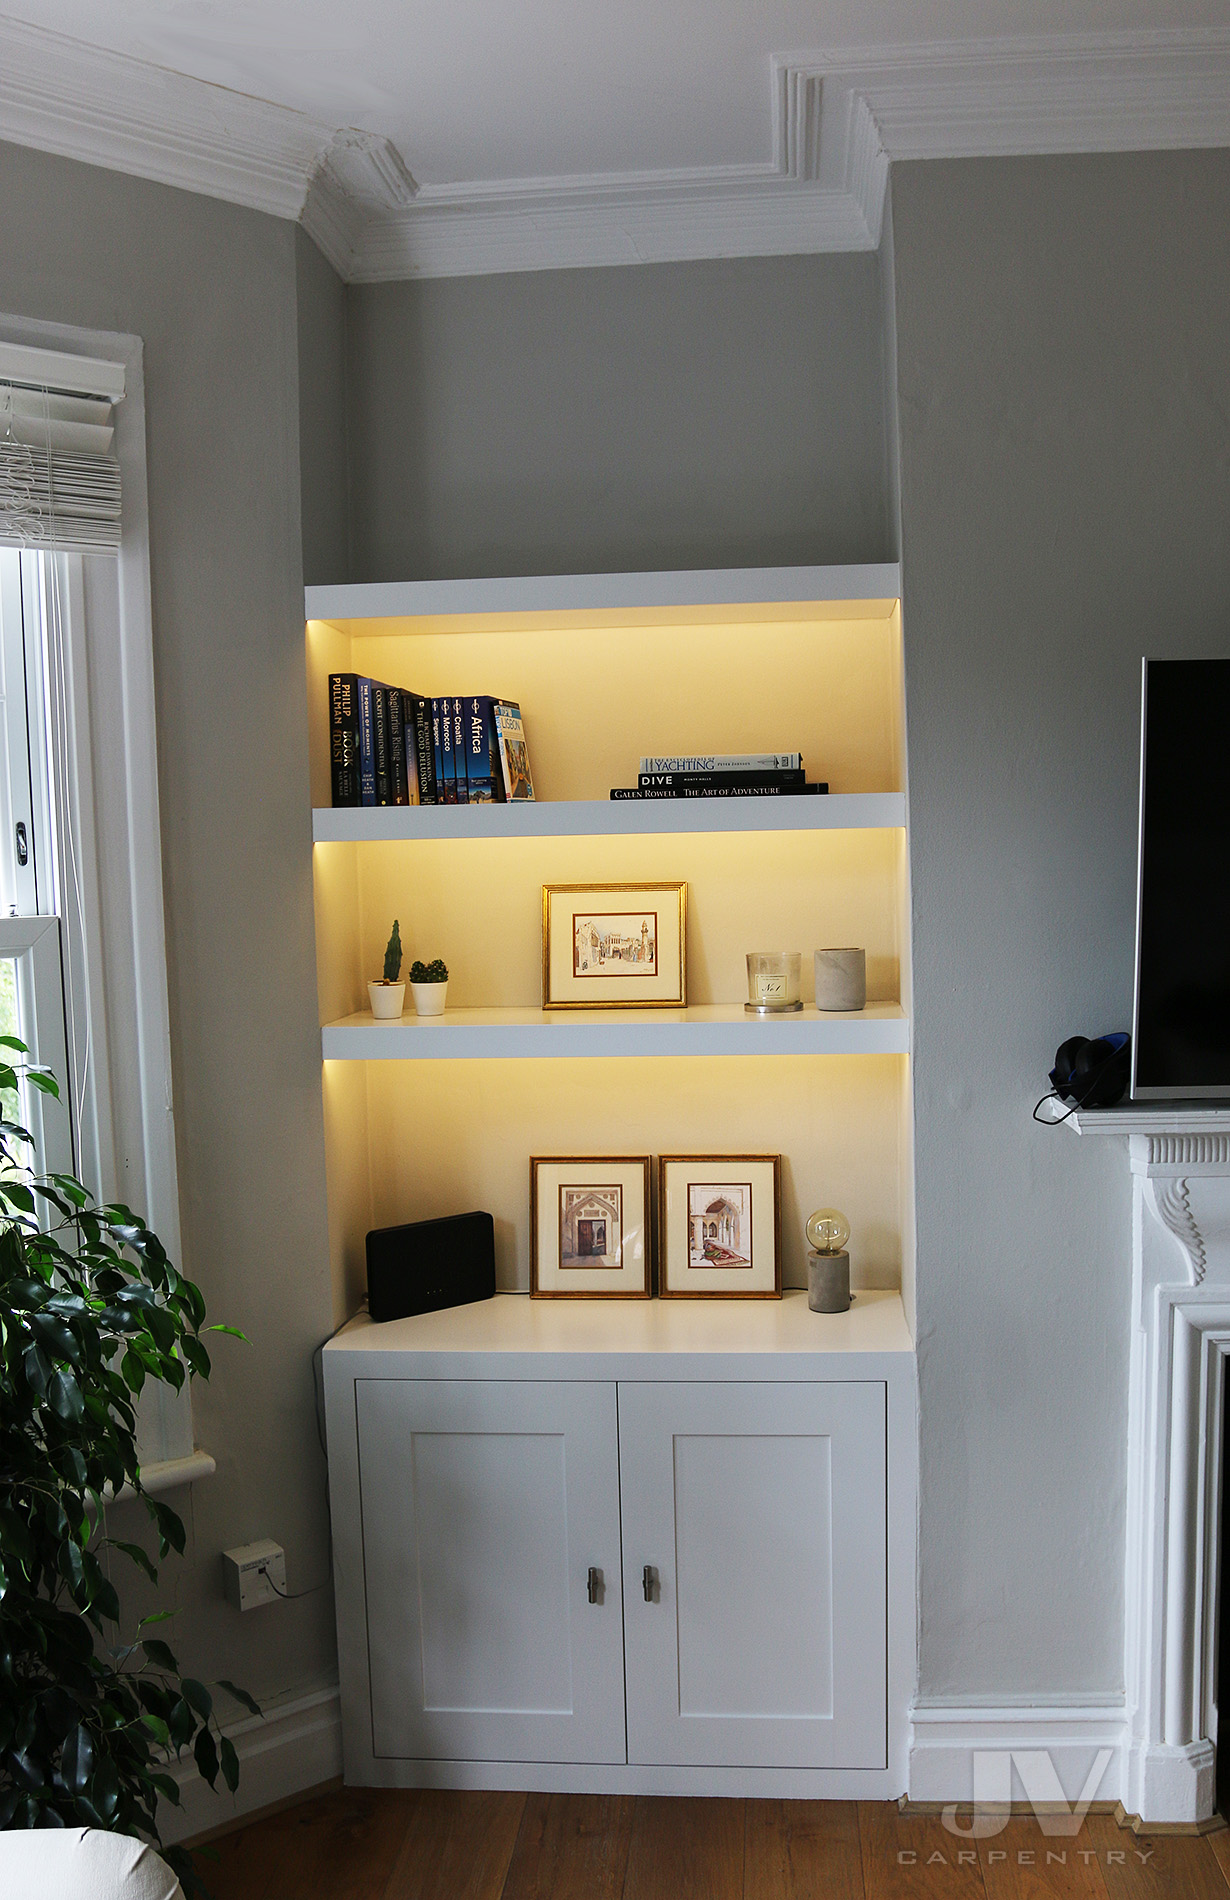 Alcove cupboards and bookshelves with lights